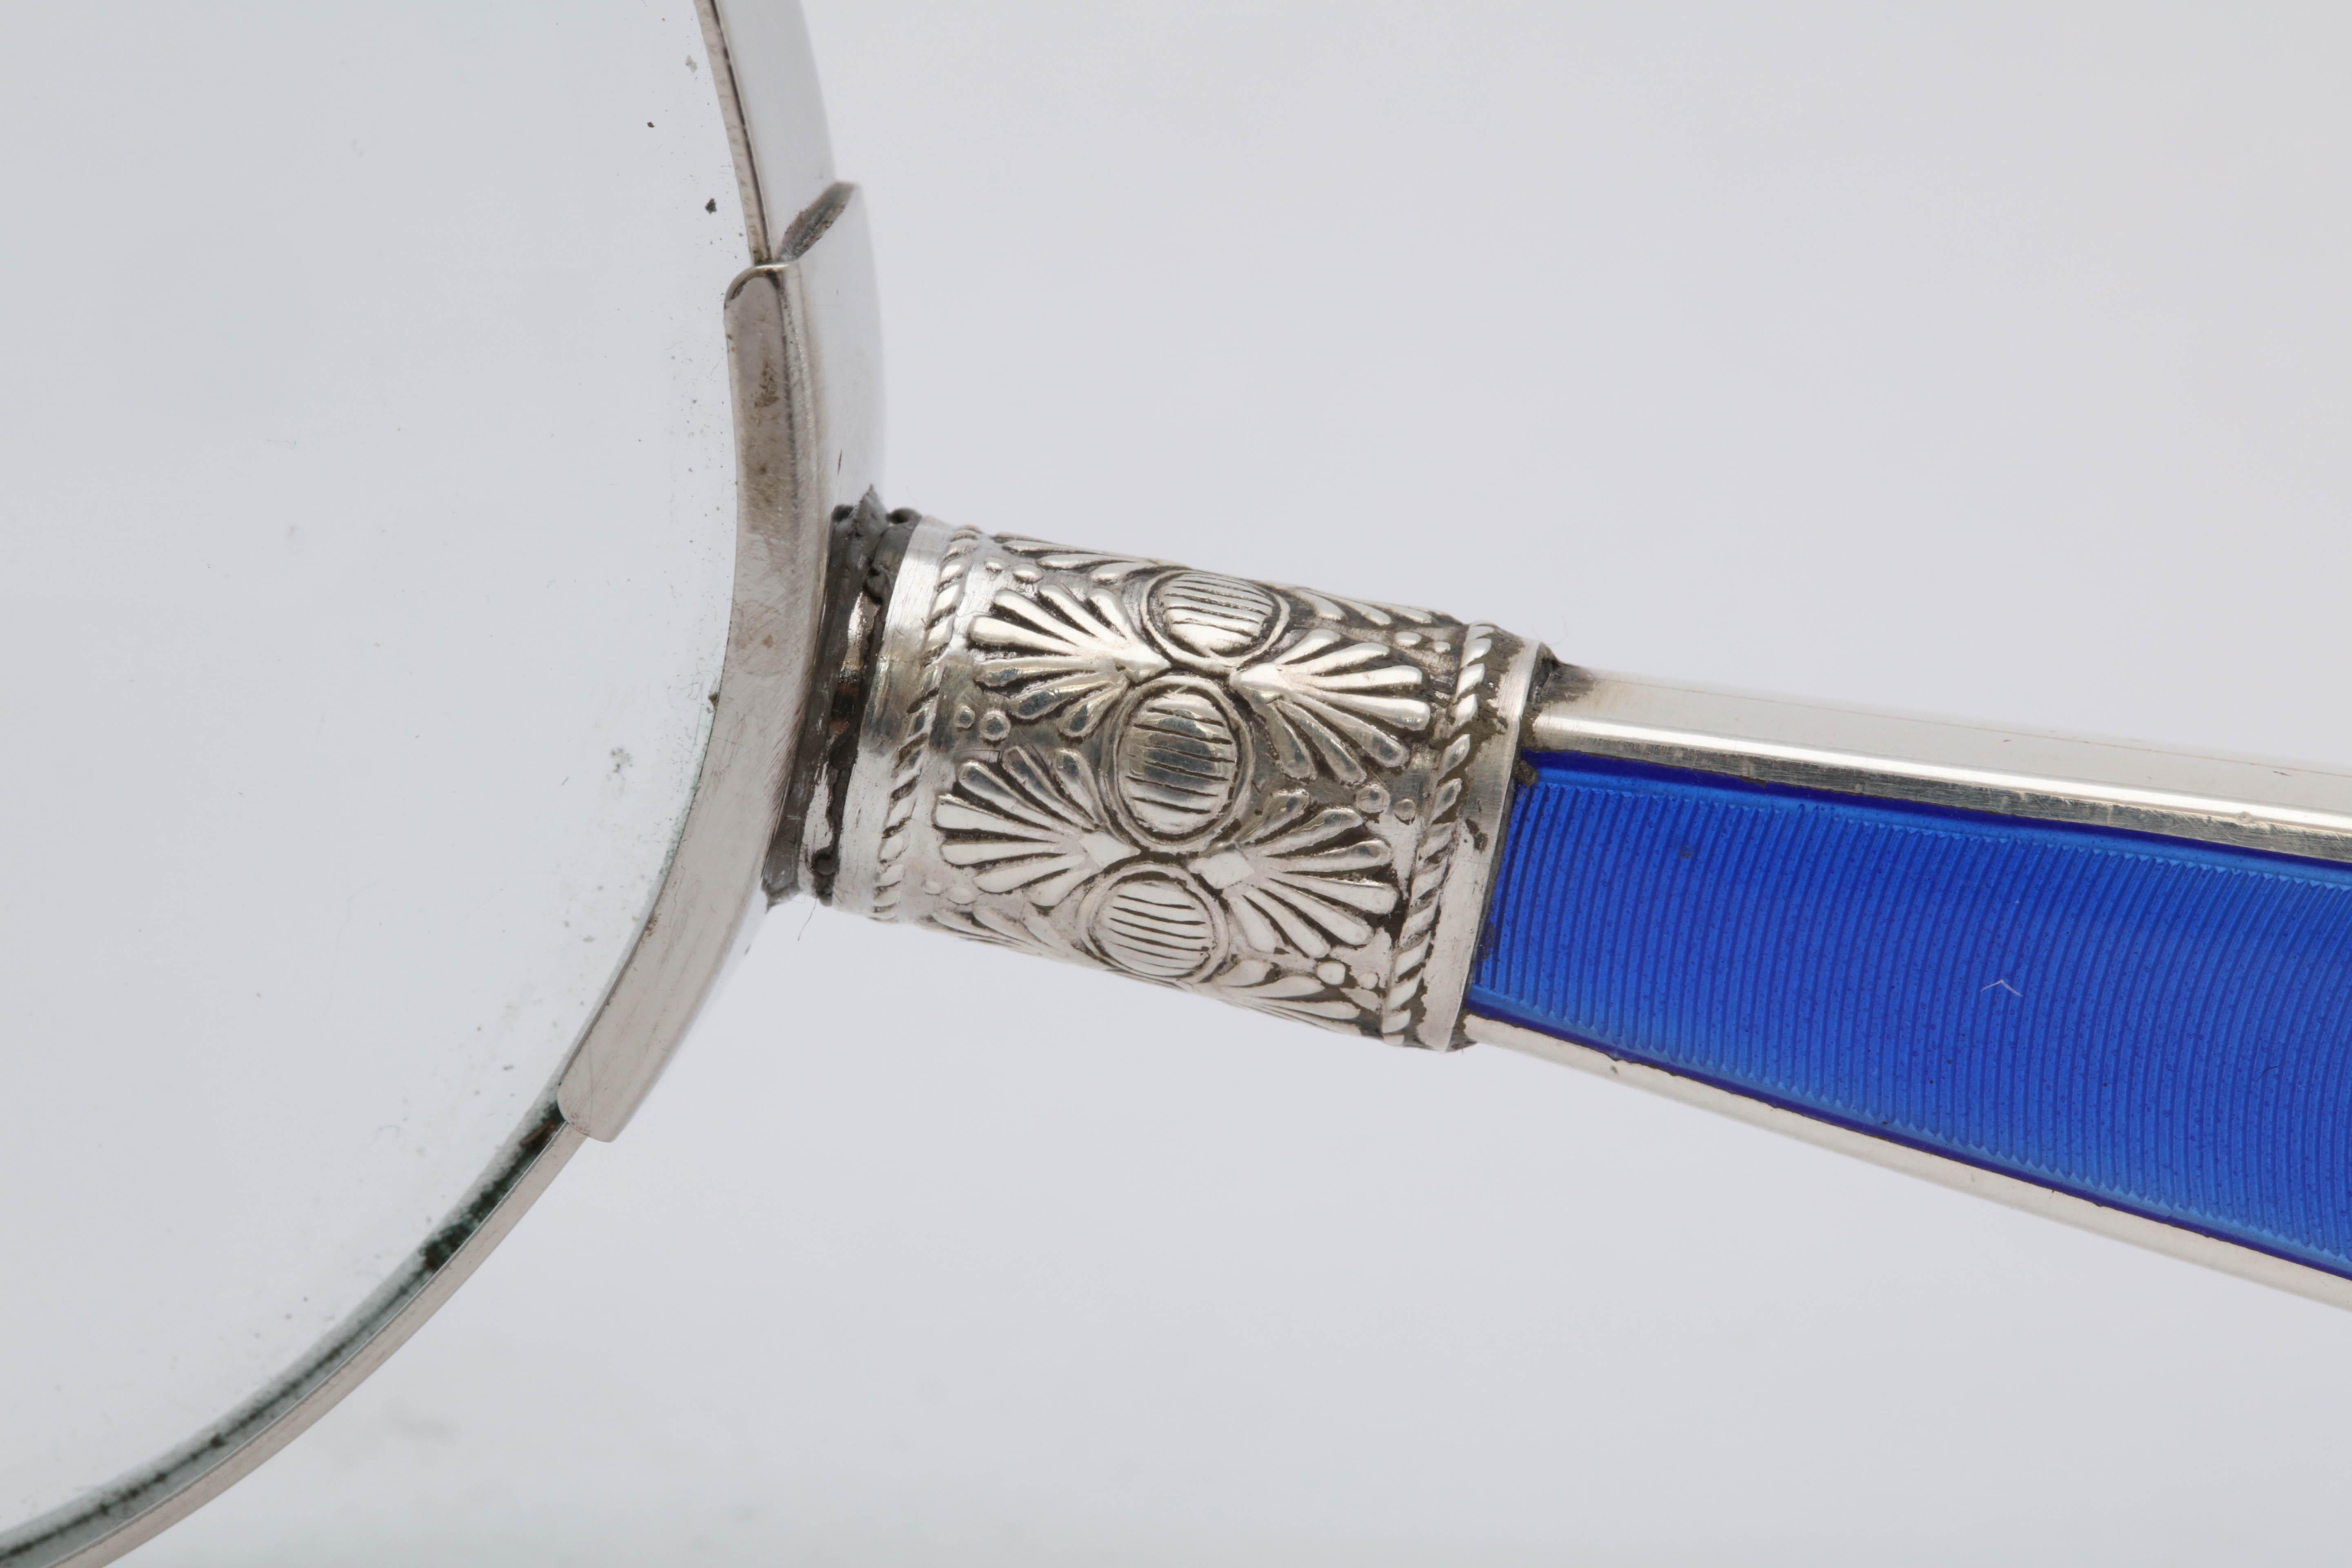 English Art Deco Sterling Silver and Deep Blue Guilloche Enamel-Mounted Magnifying Glass